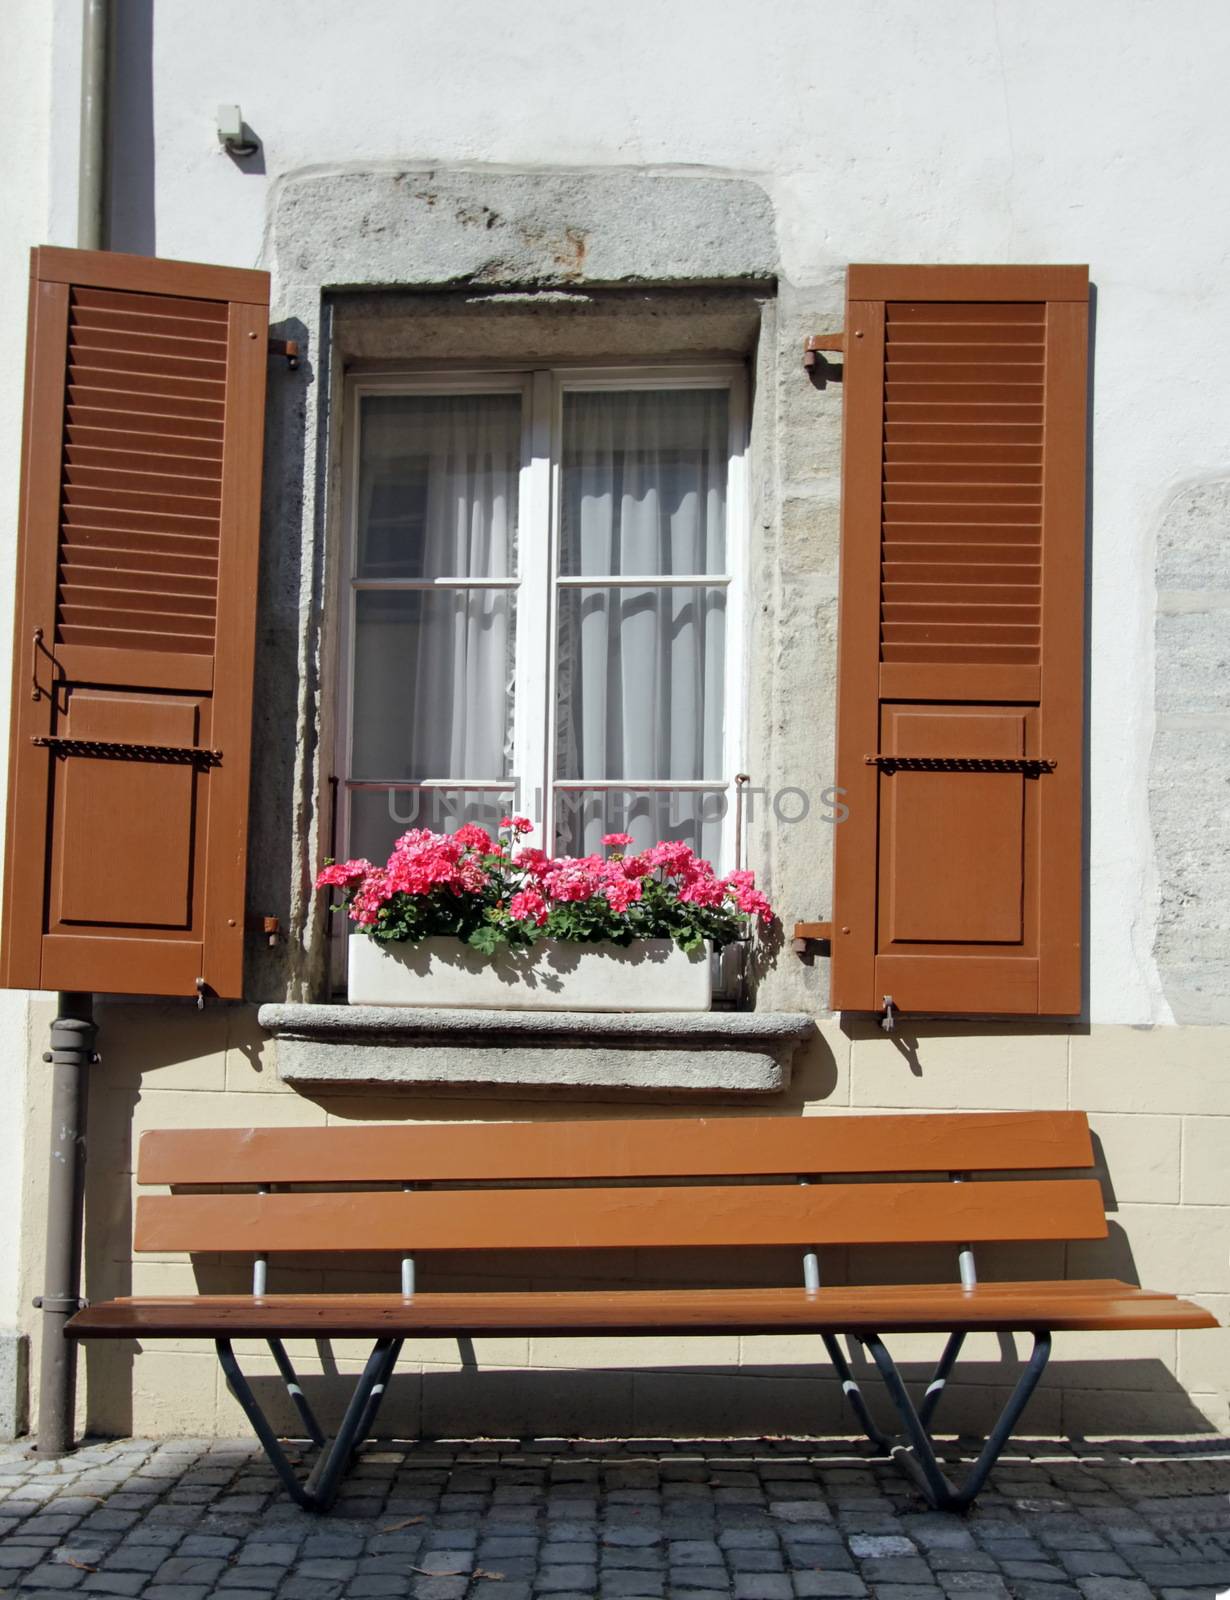 Brown bench under old window with shutters in front of white wall, Estavayer-le-lac, Switzerland